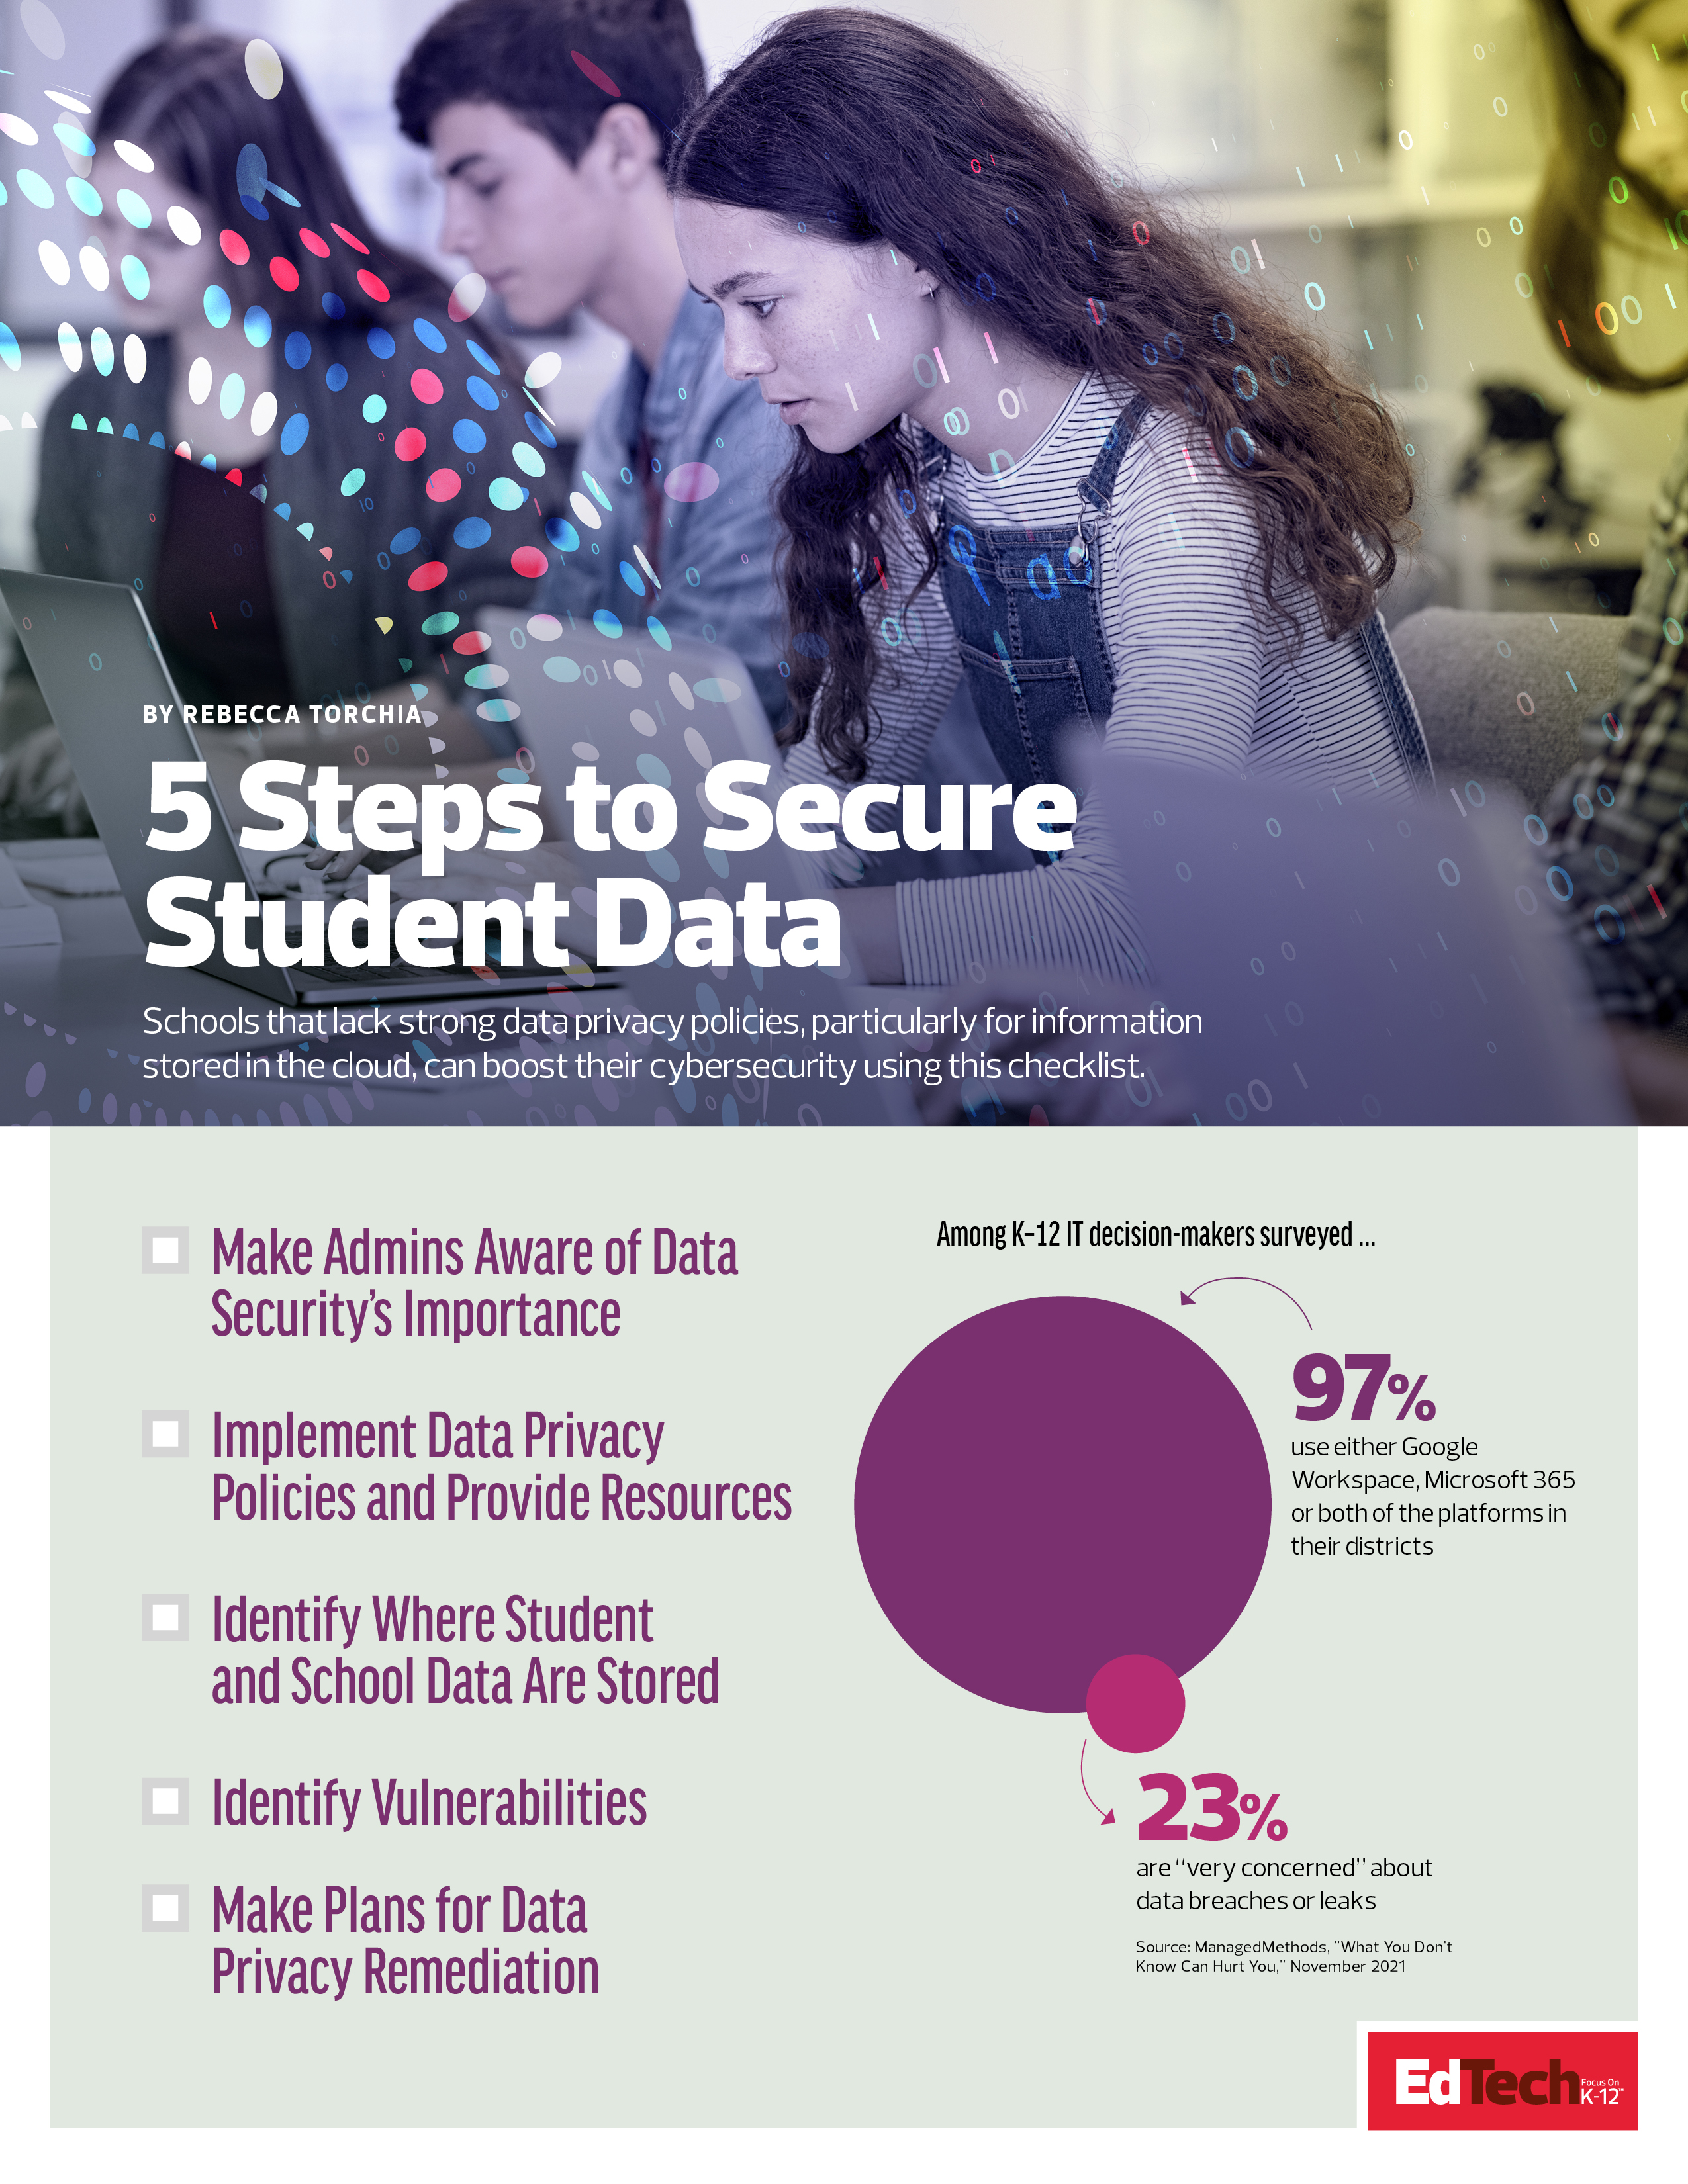 5 Steps to Securing Student Data Checklist